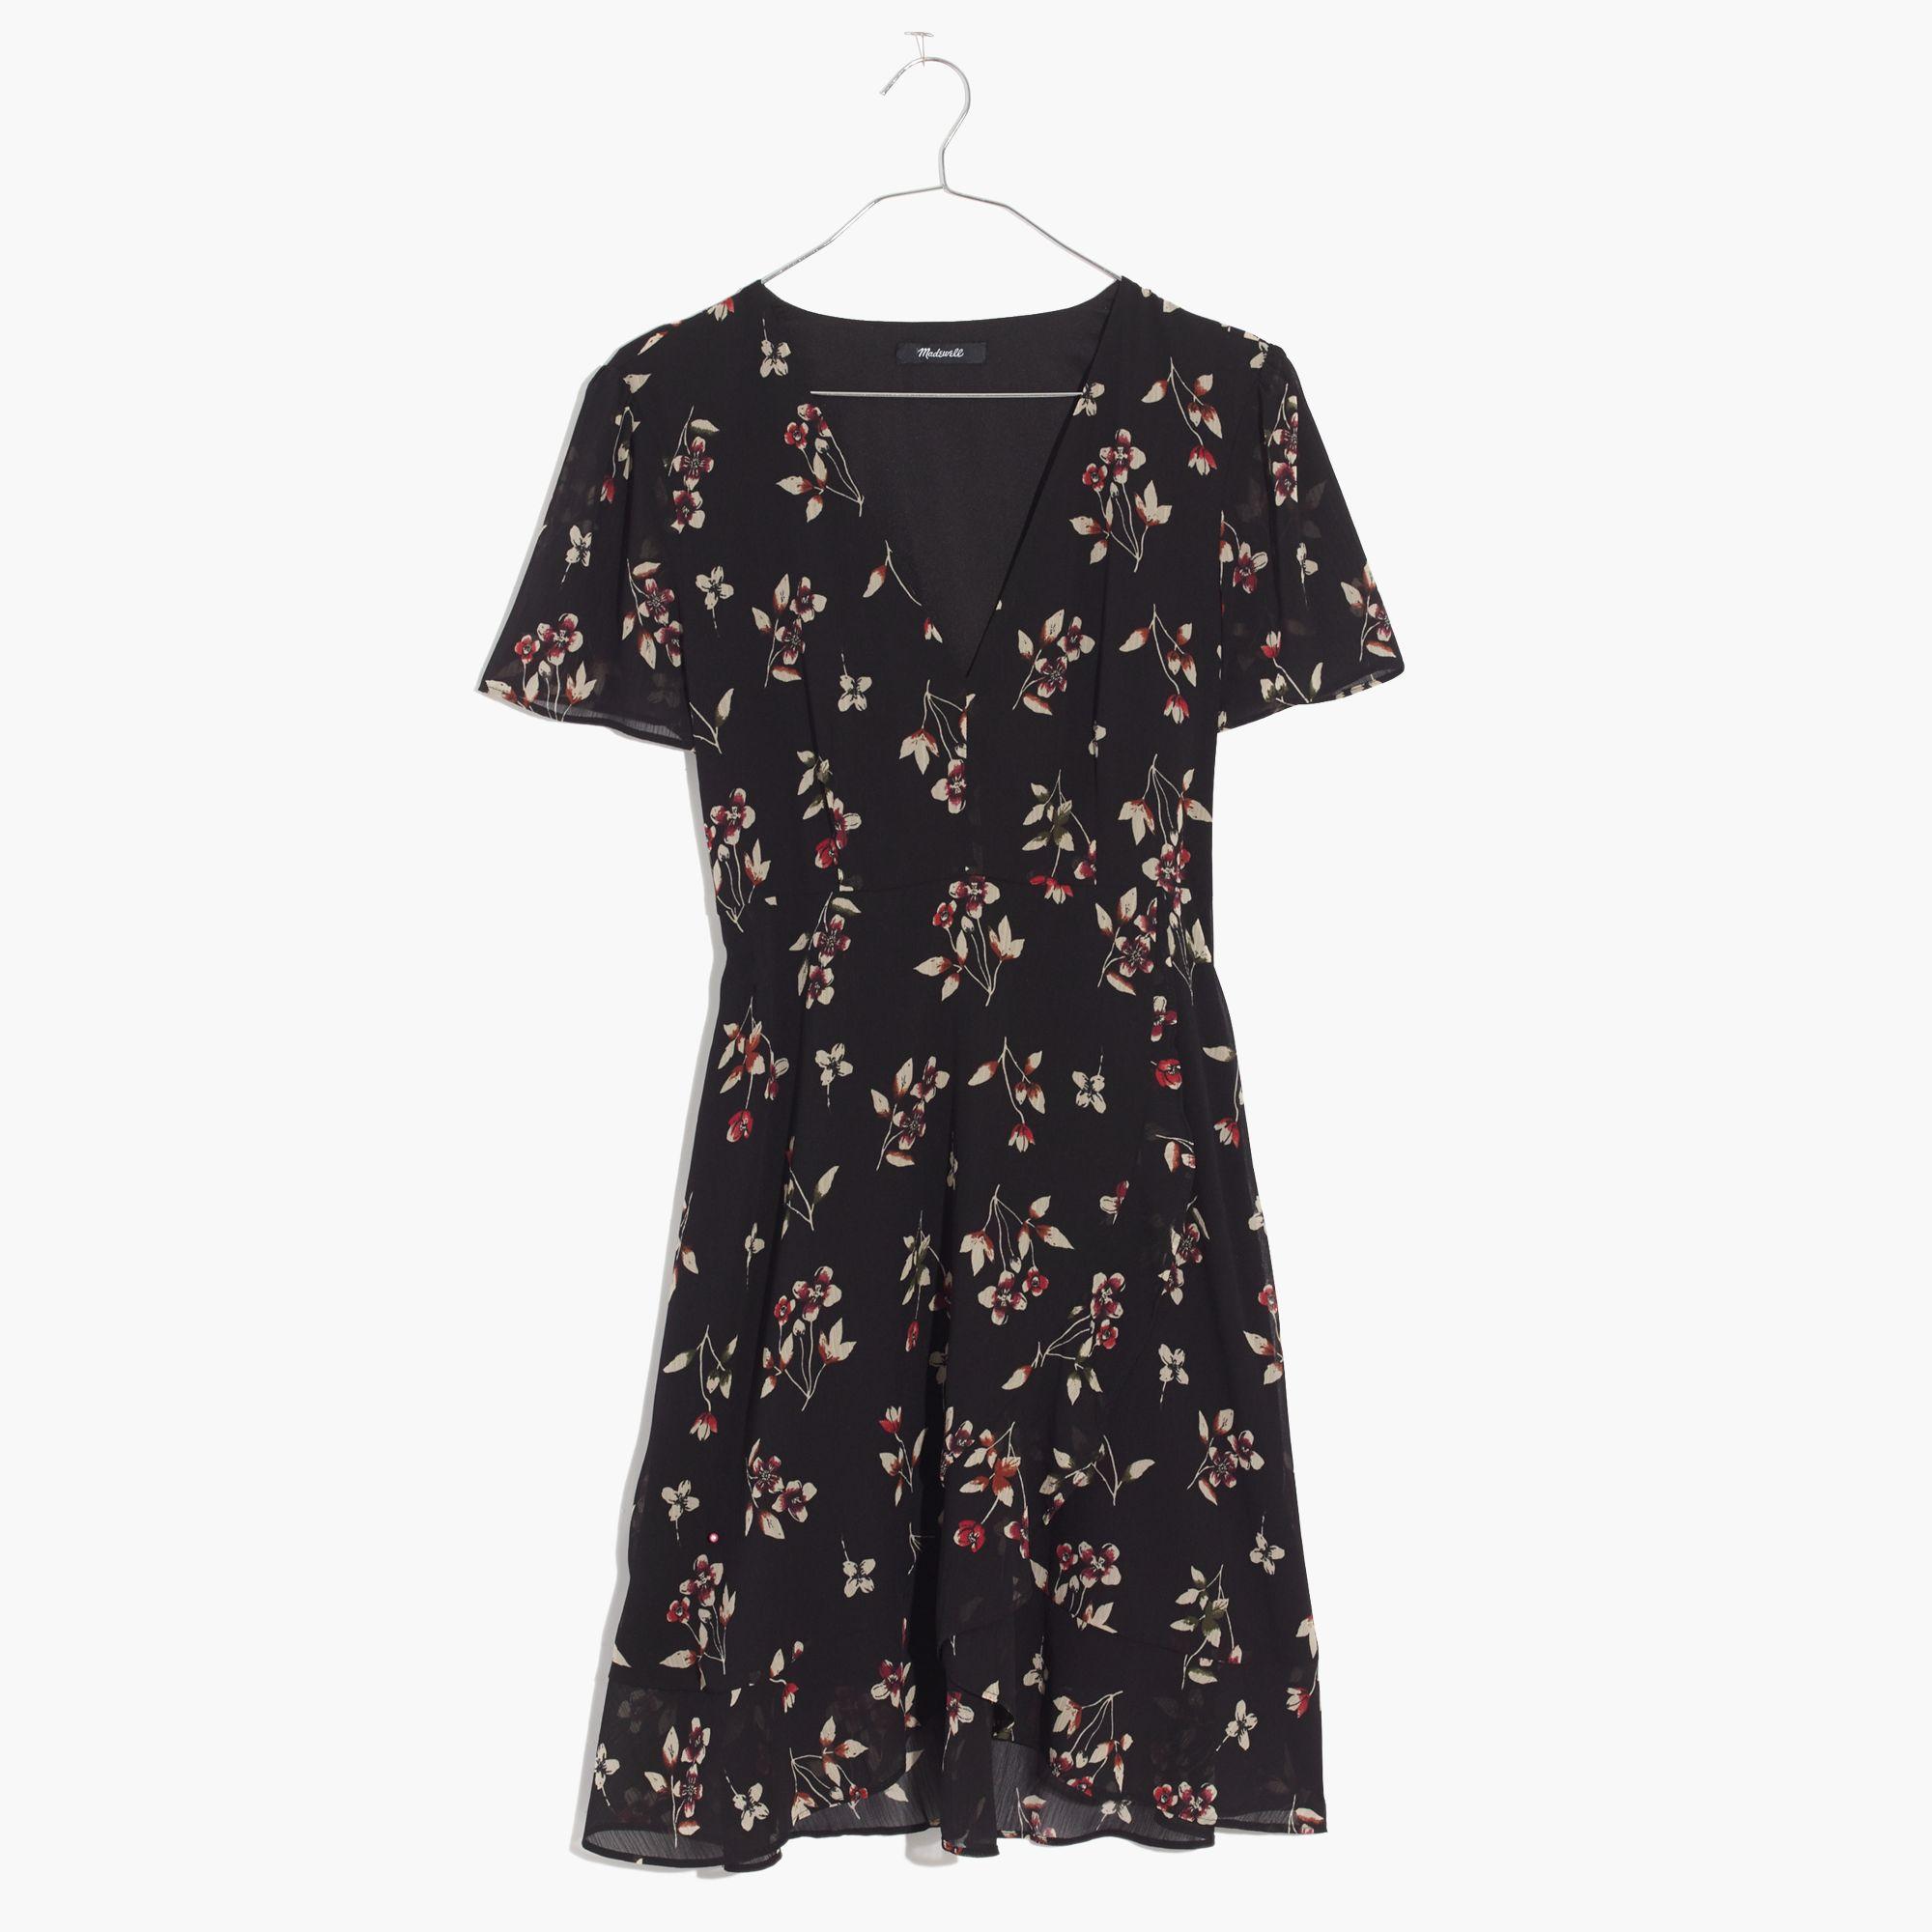 Madewell Leather Posy Floral Ruffle Dress in Black - Lyst